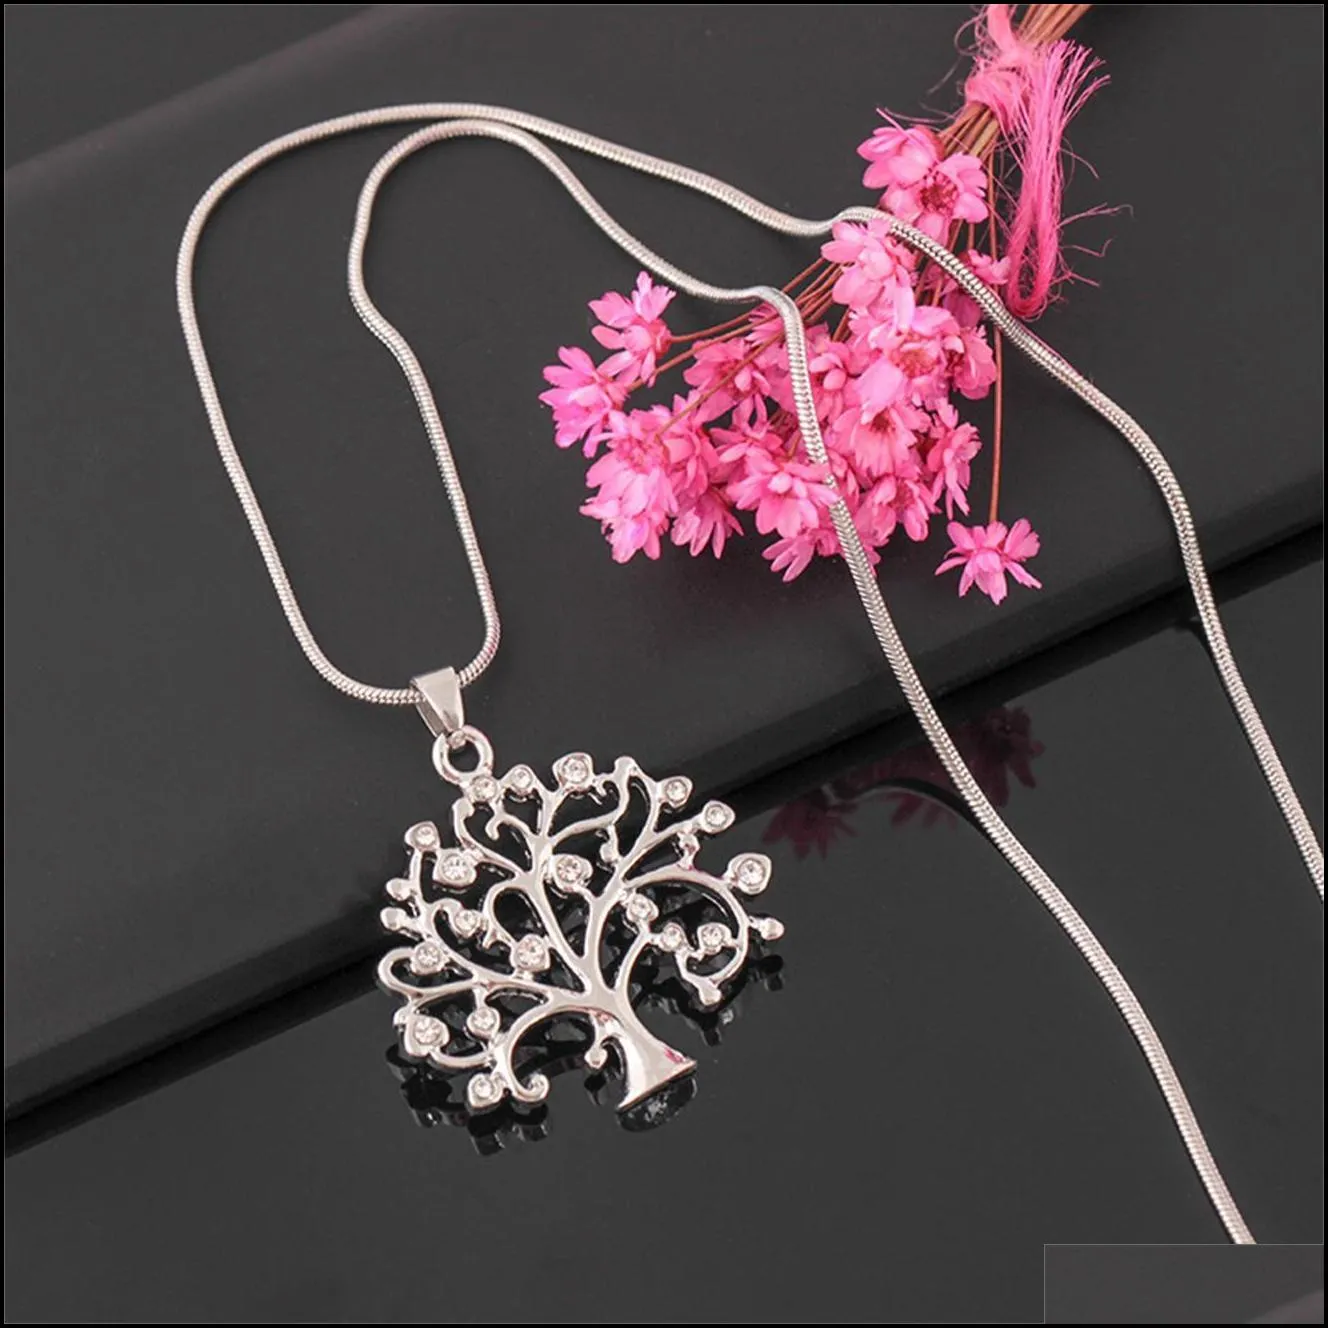 tree of life pendant necklace women chic jewelry crystal statement necklaces pendants christmas gifts bijoux rose gold long chain